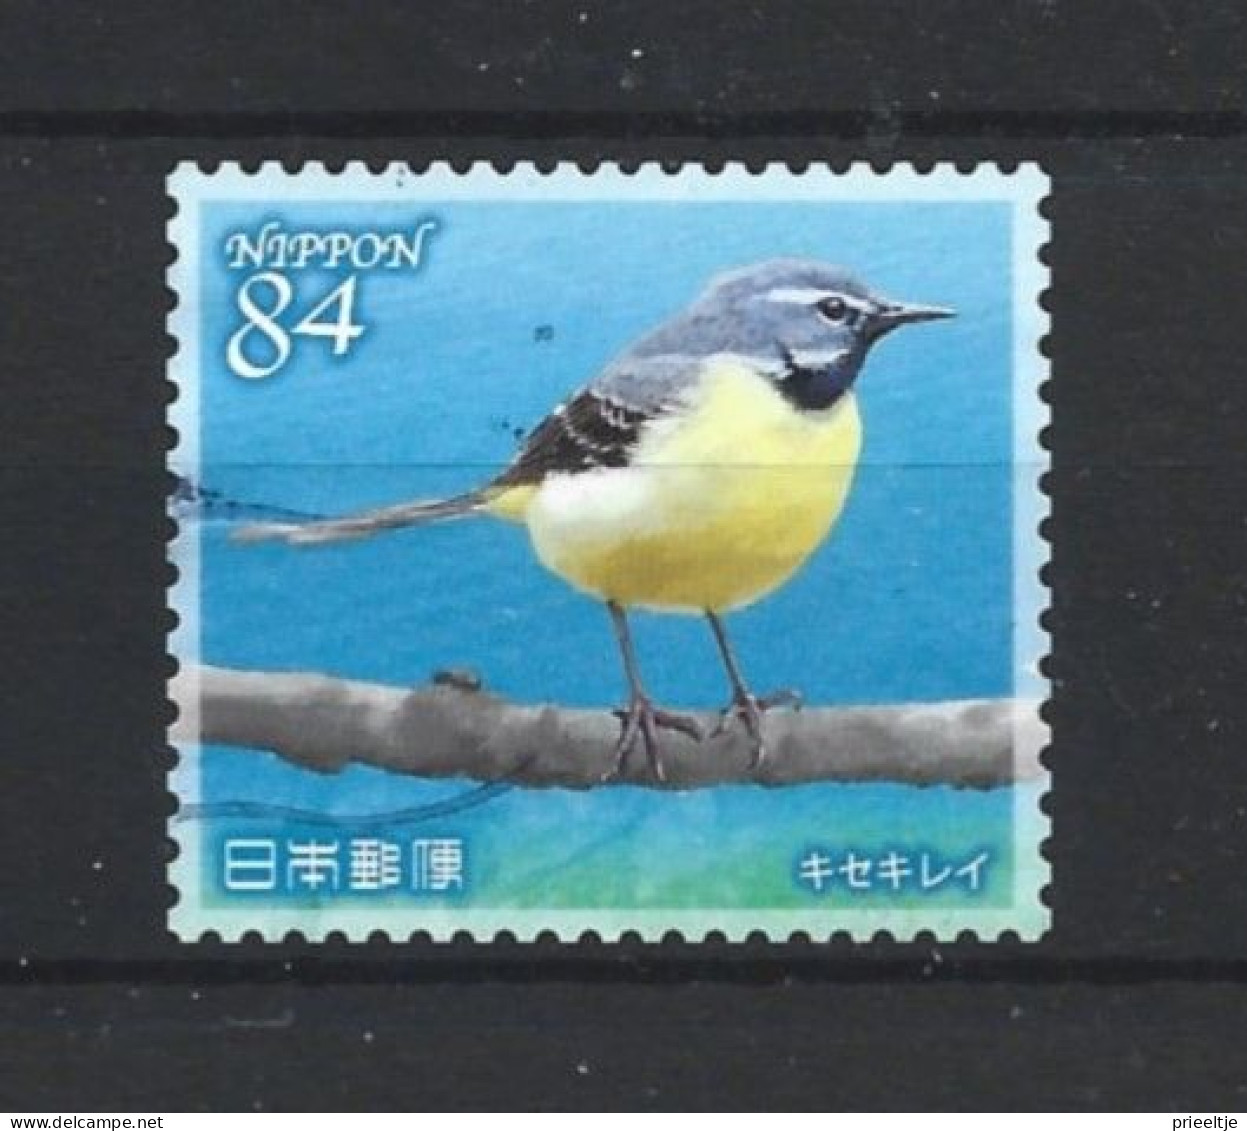 Japan 2021 Fauna & Flora Y.T. 10451 (0) - Used Stamps